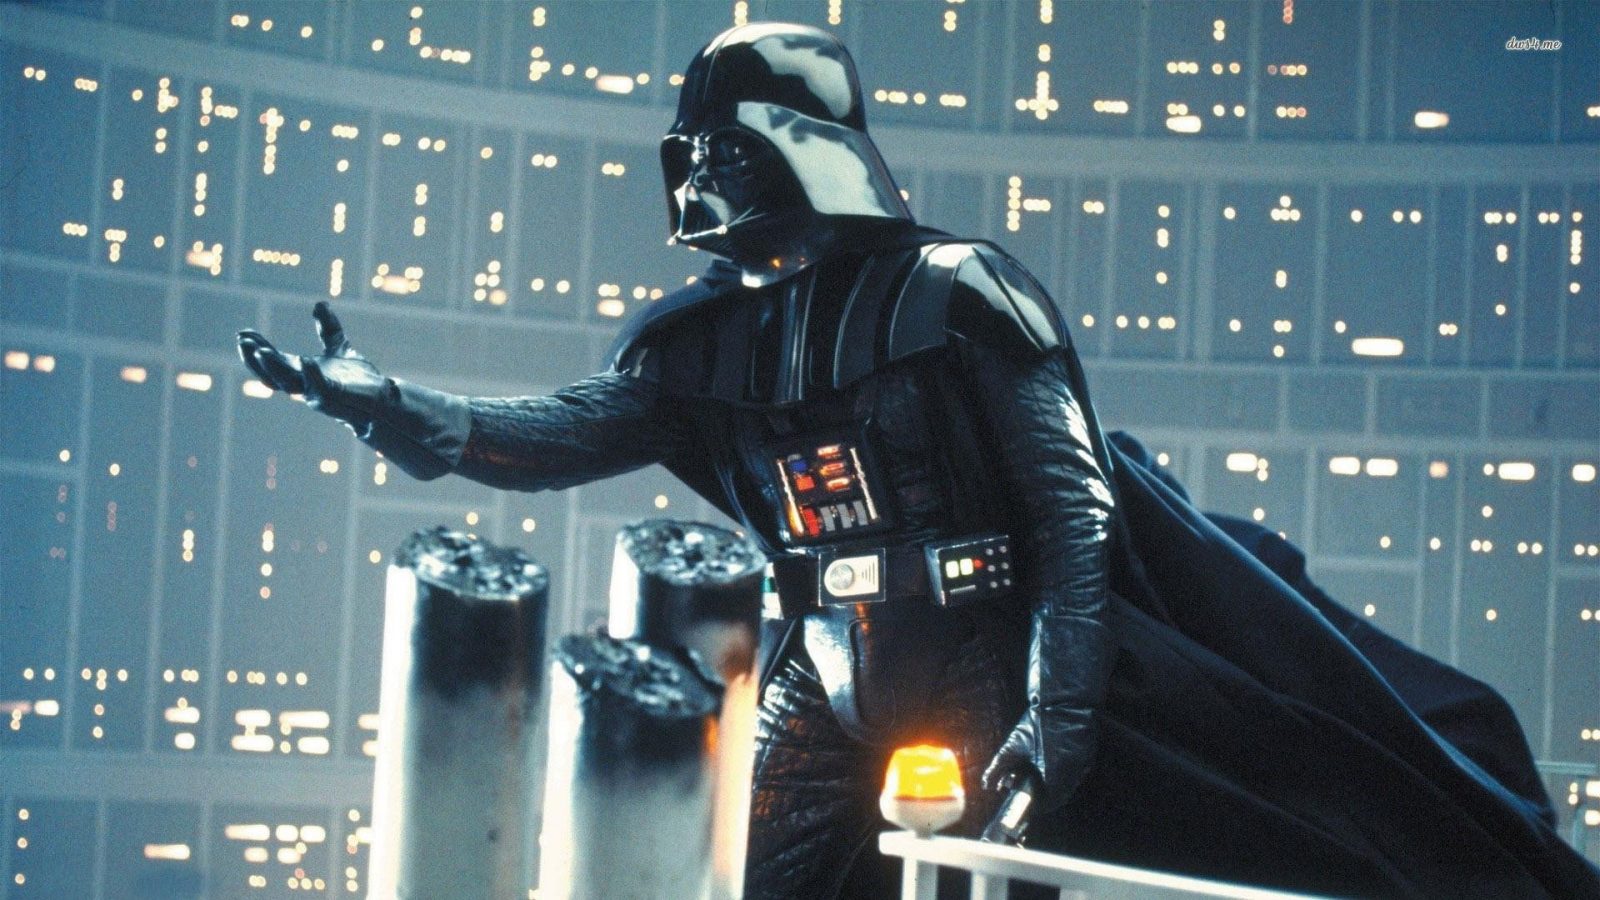 Which Marvel/Star Wars/Game Of Thrones Hybrid Character Are You? Darth Vader 3 1920x1080